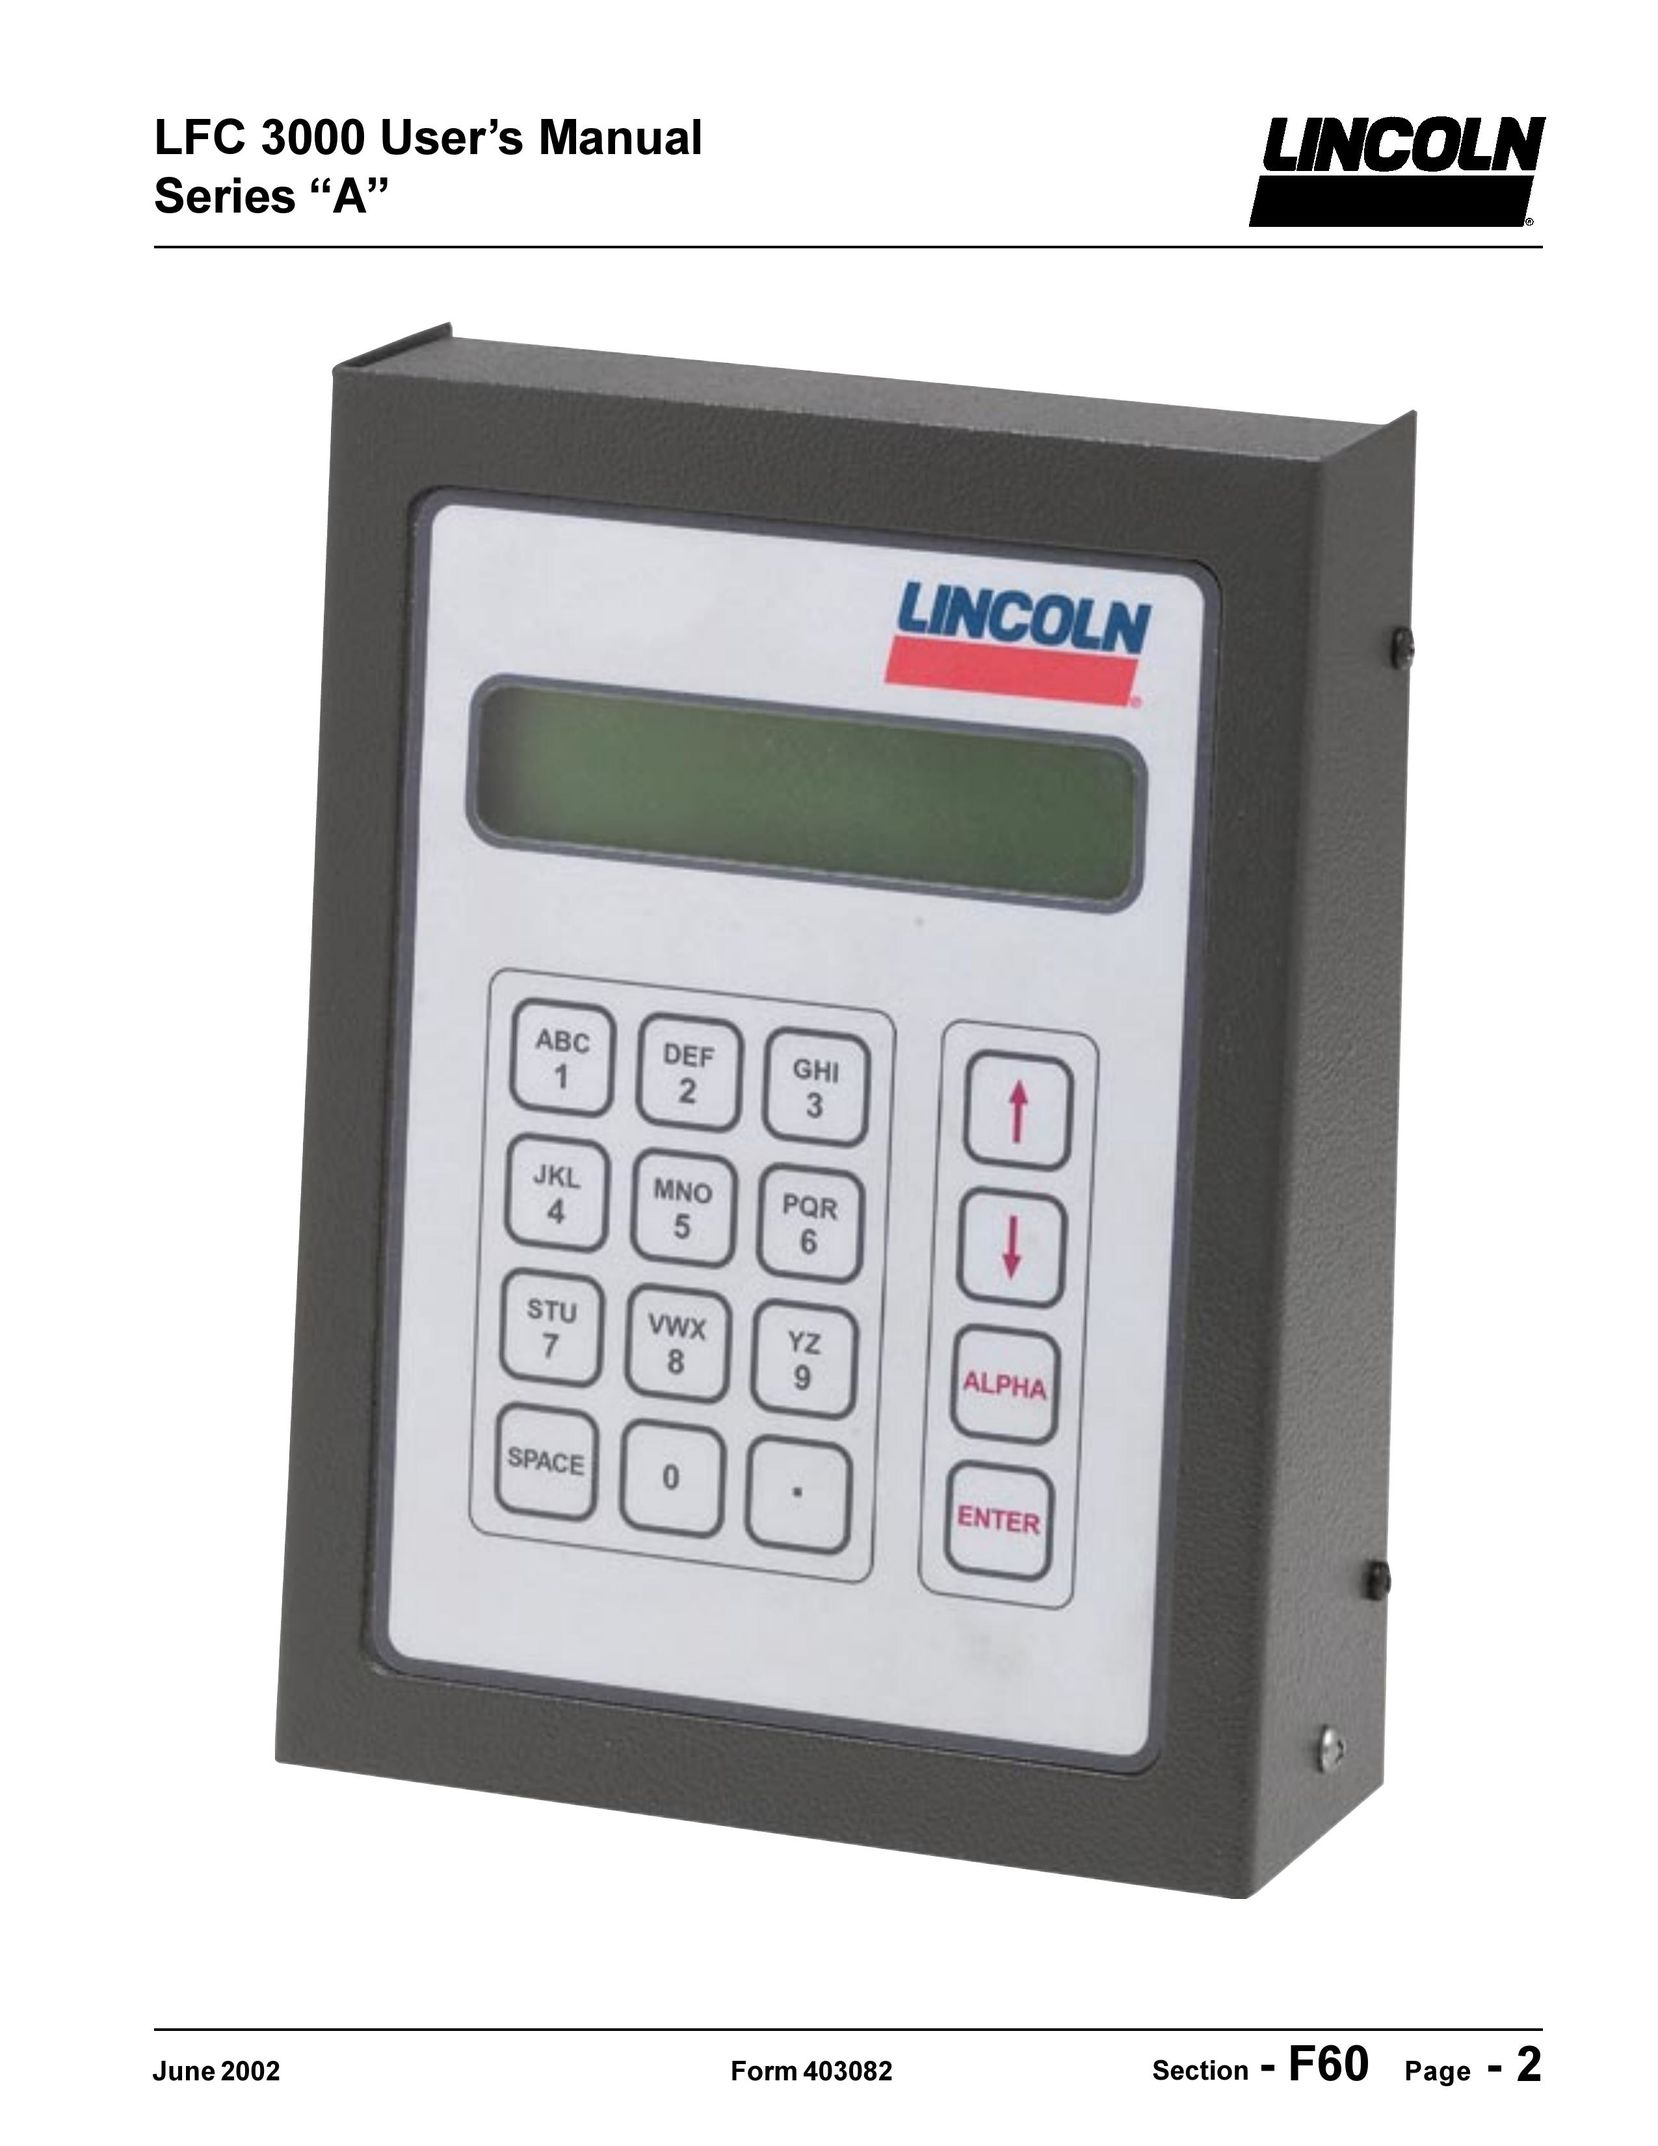 Lincoln LFC 3000 Home Security System User Manual